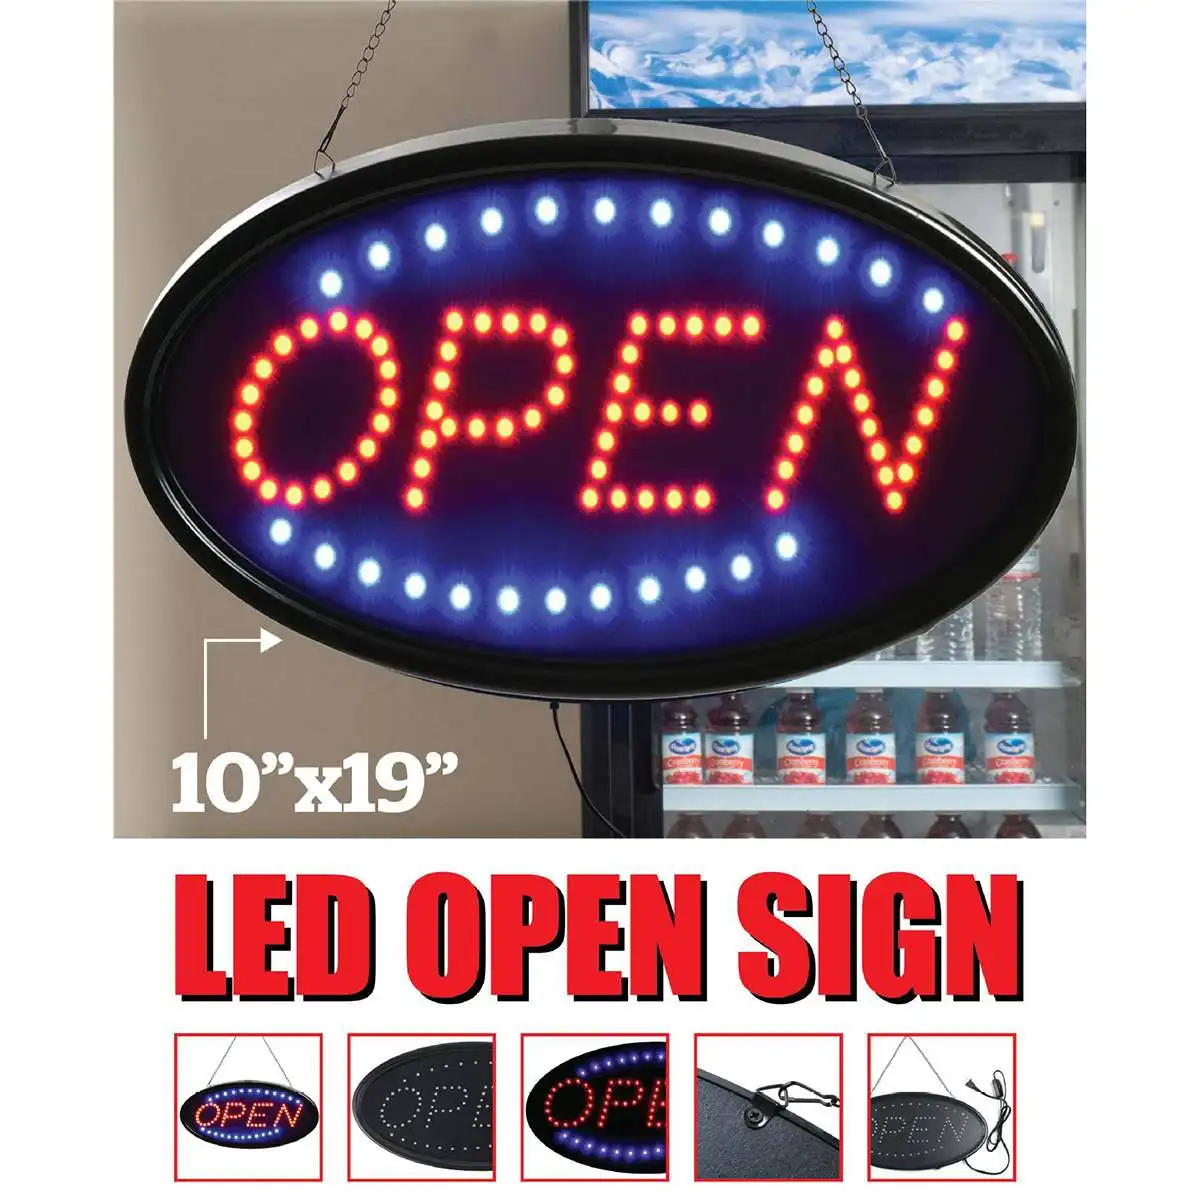 Pipigirl LED Open 7 Days Sign Neon Light Advertising Display Board General Purpose for Shops Hotels Supermarkets Convenience Stores 